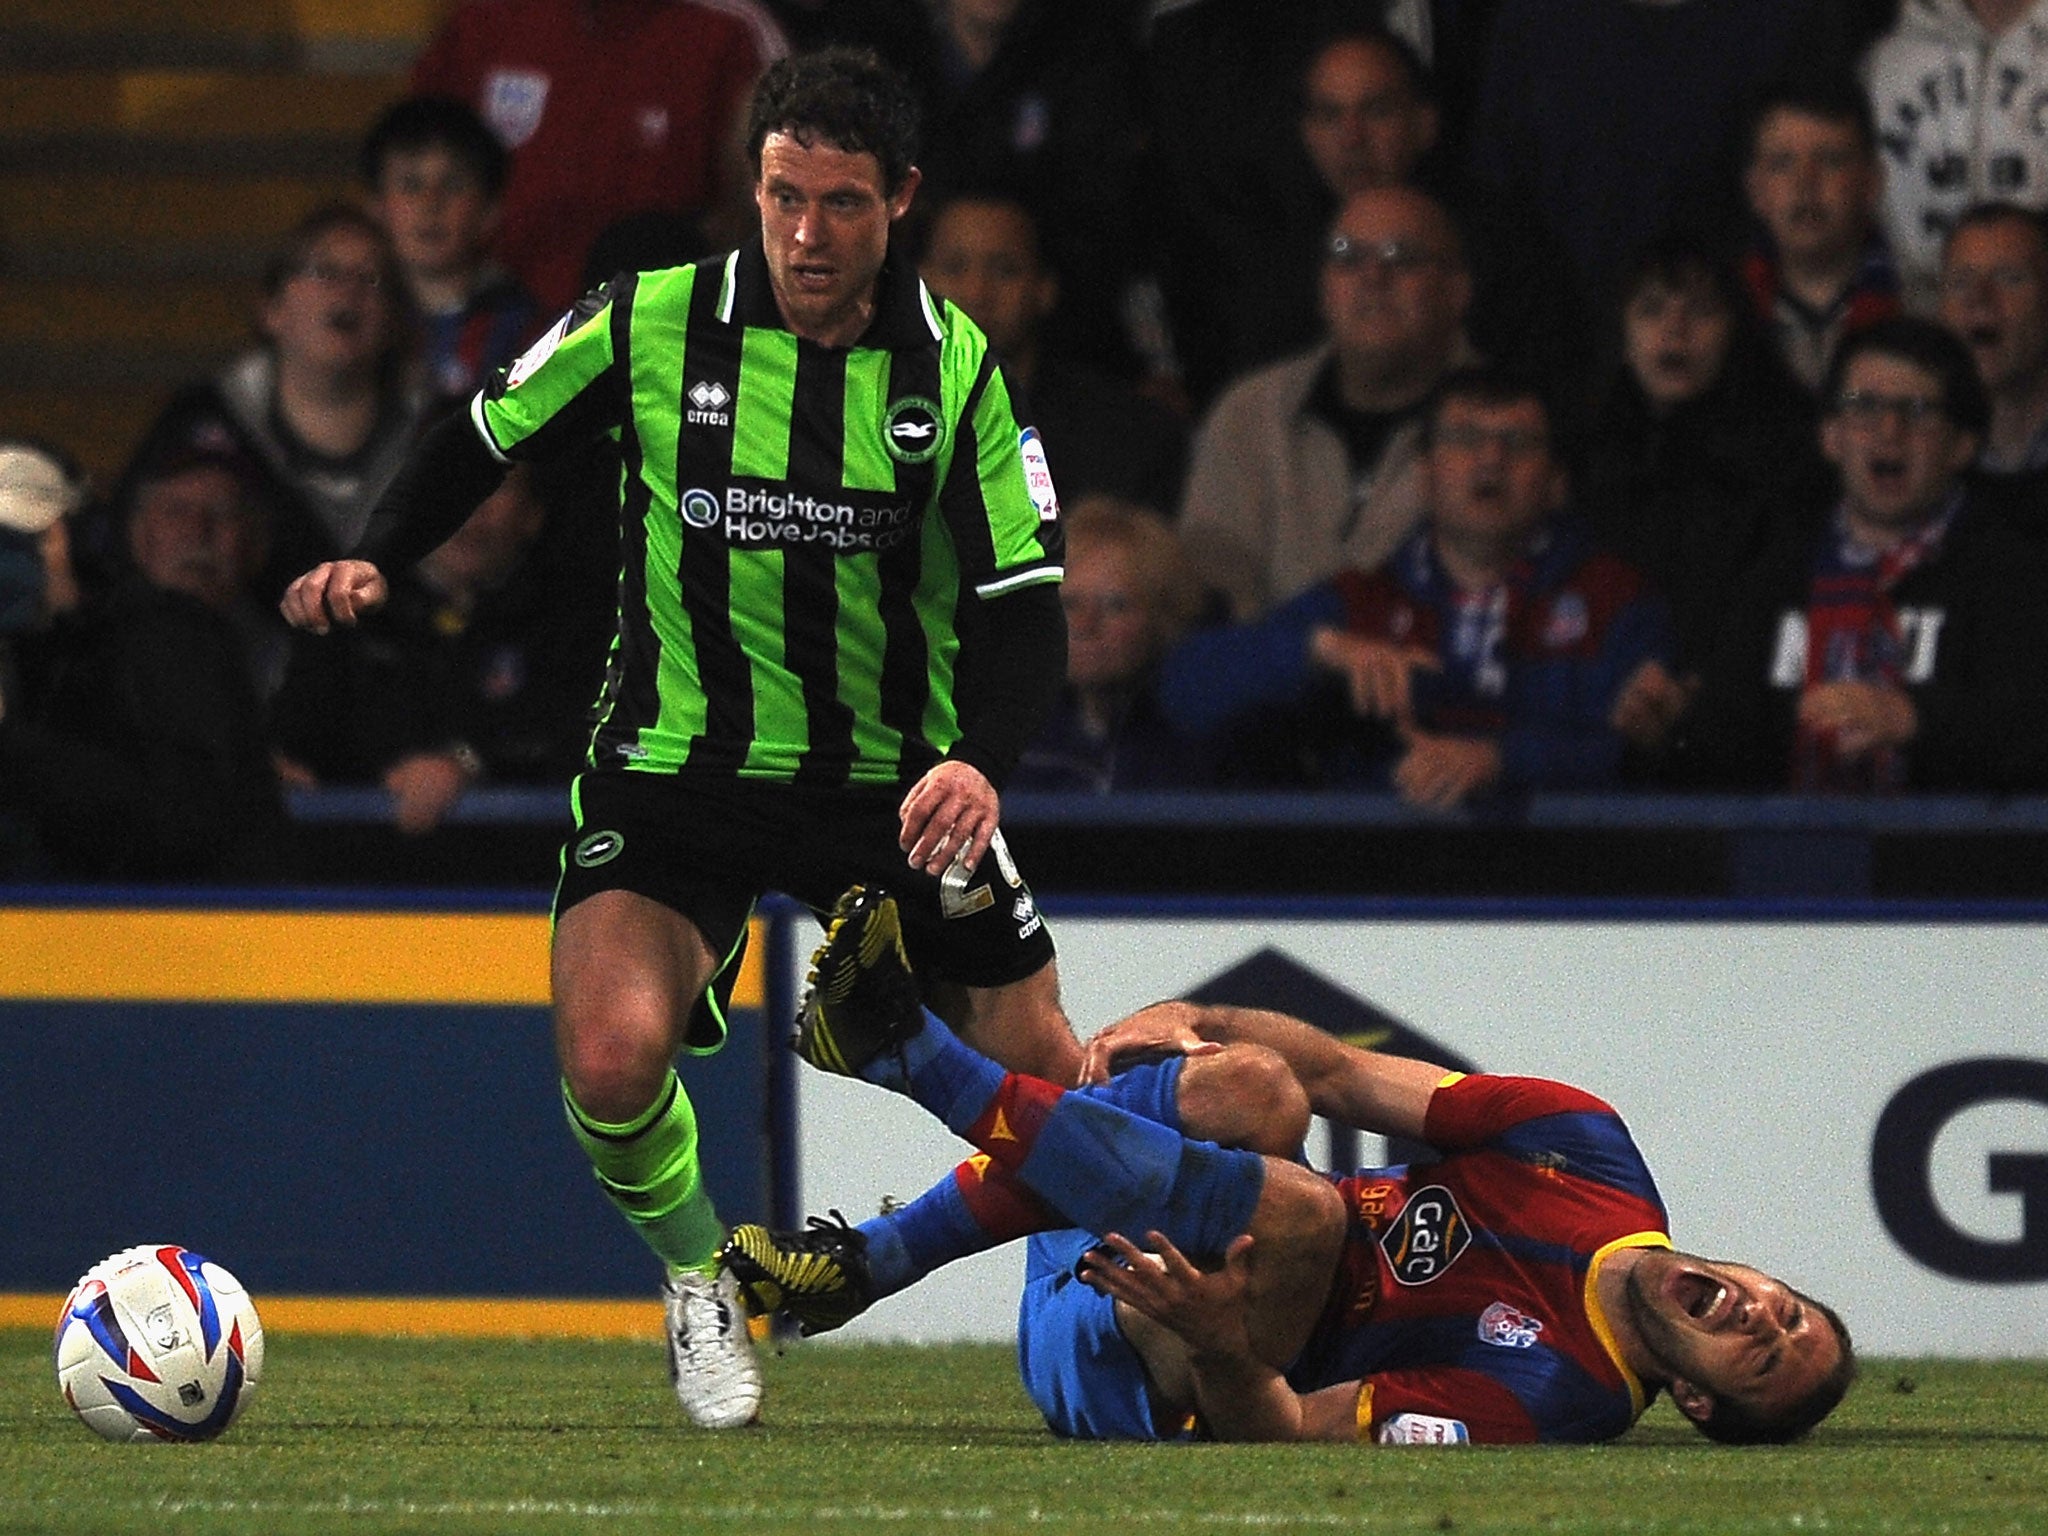 Glenn Murray of Palace goes down injured and is later taken off the field